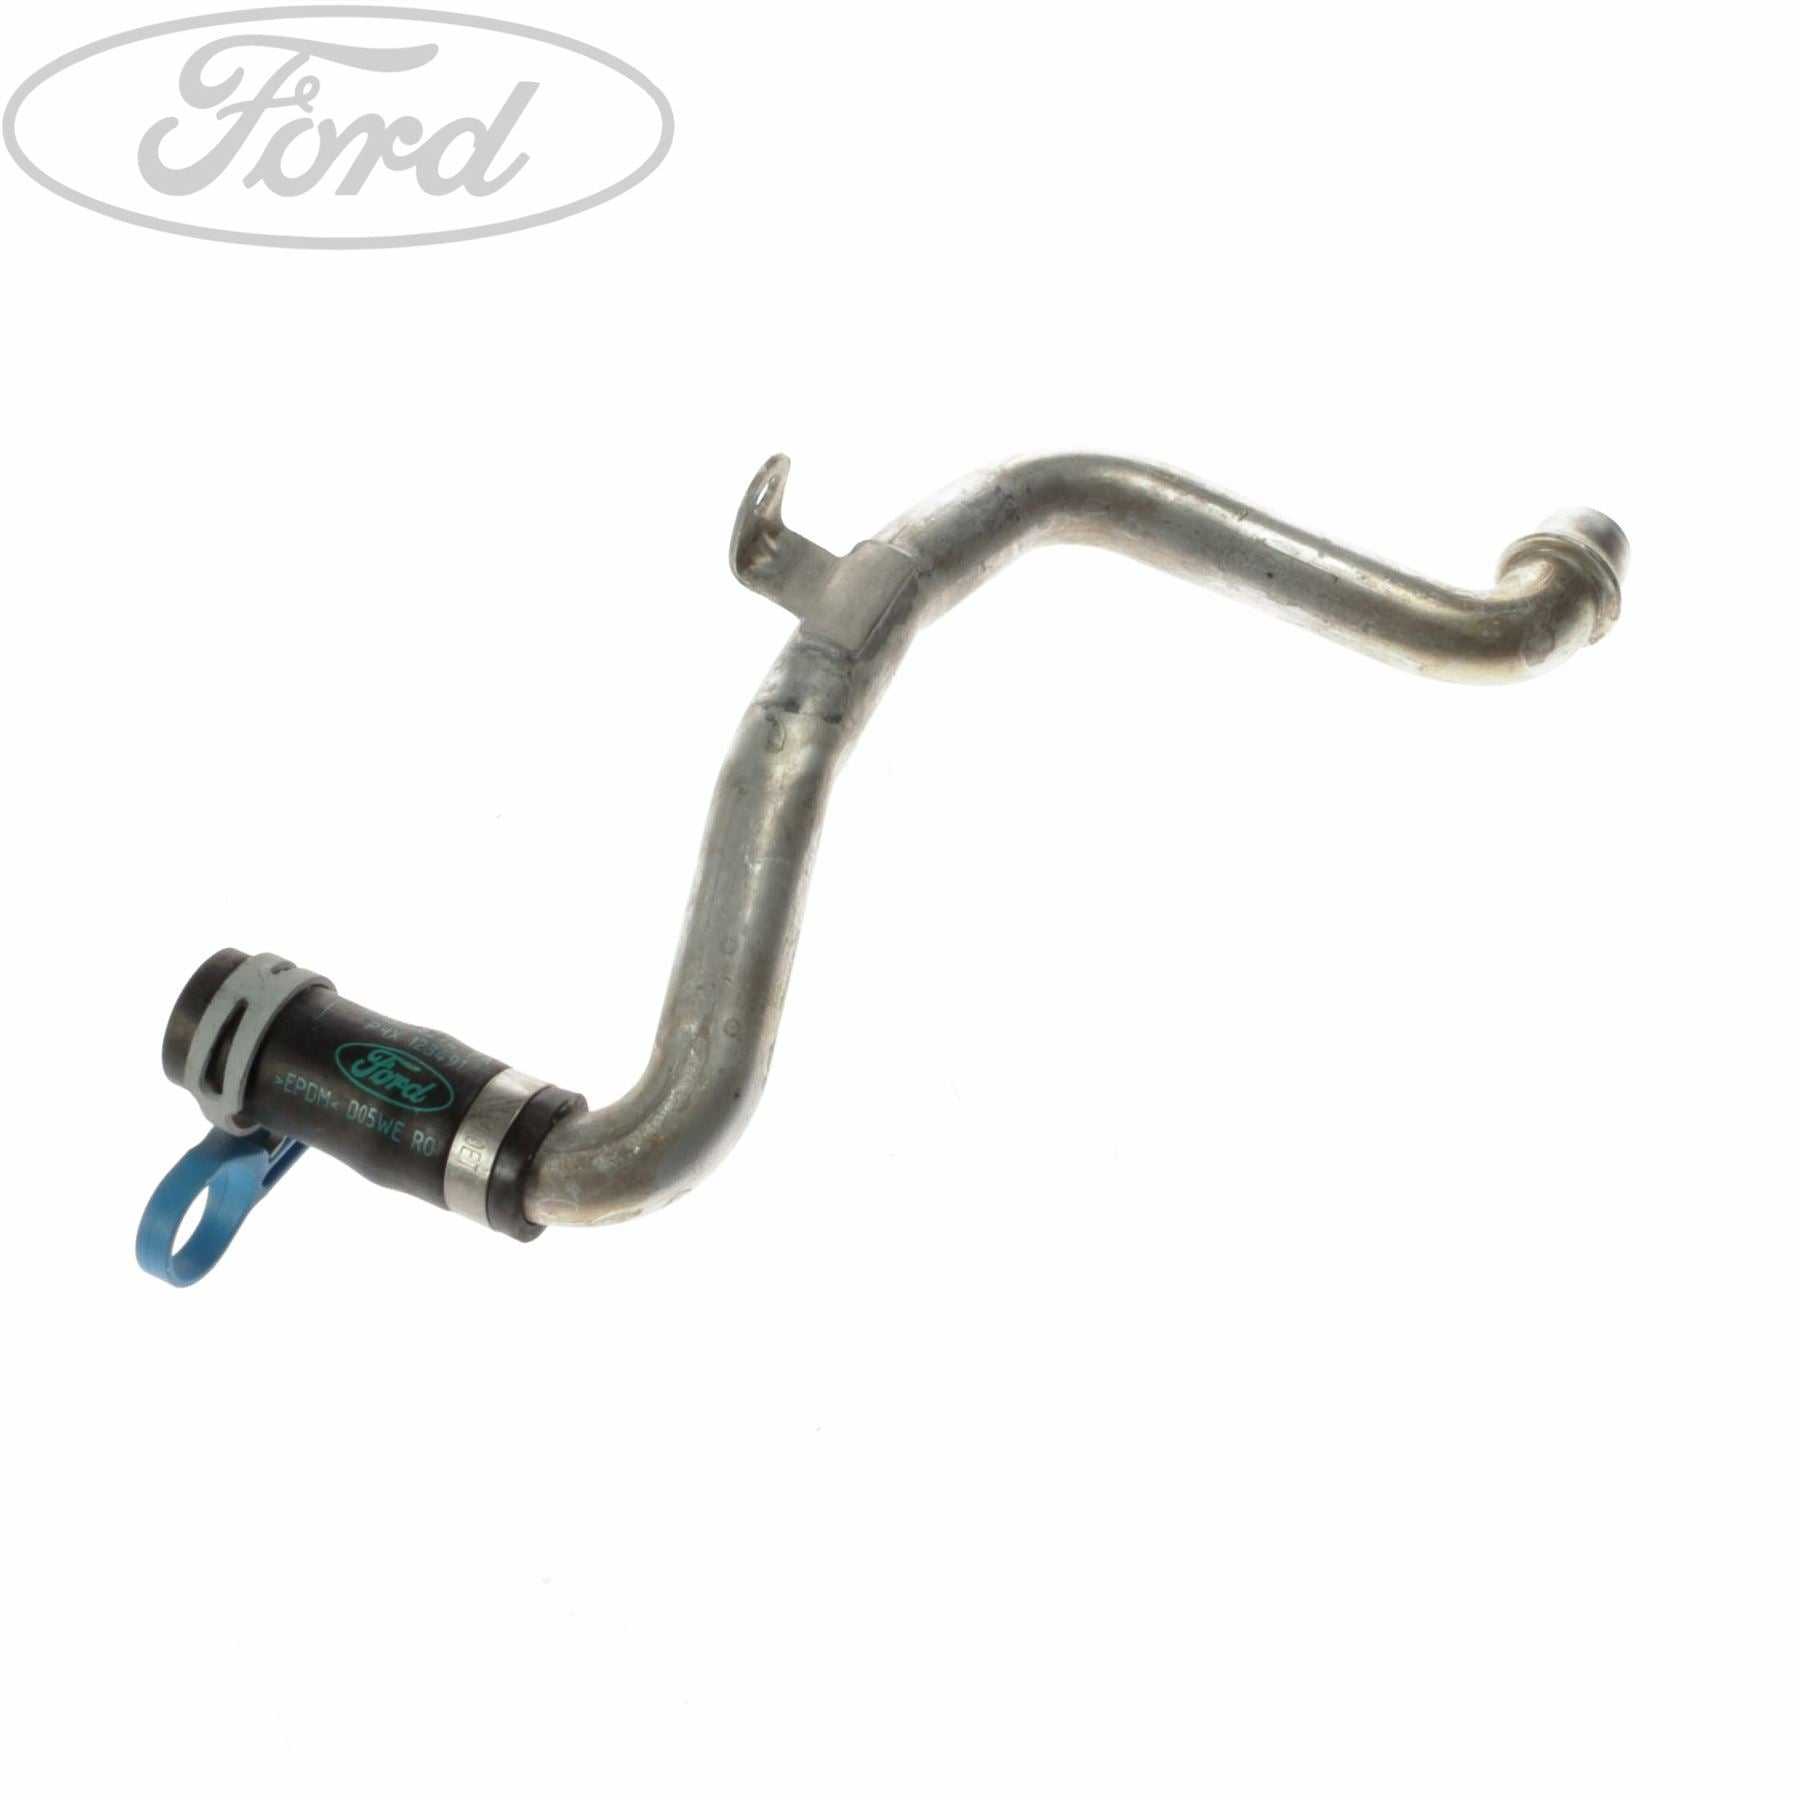 Ford, THERMOSTAT HOUSING HOSE